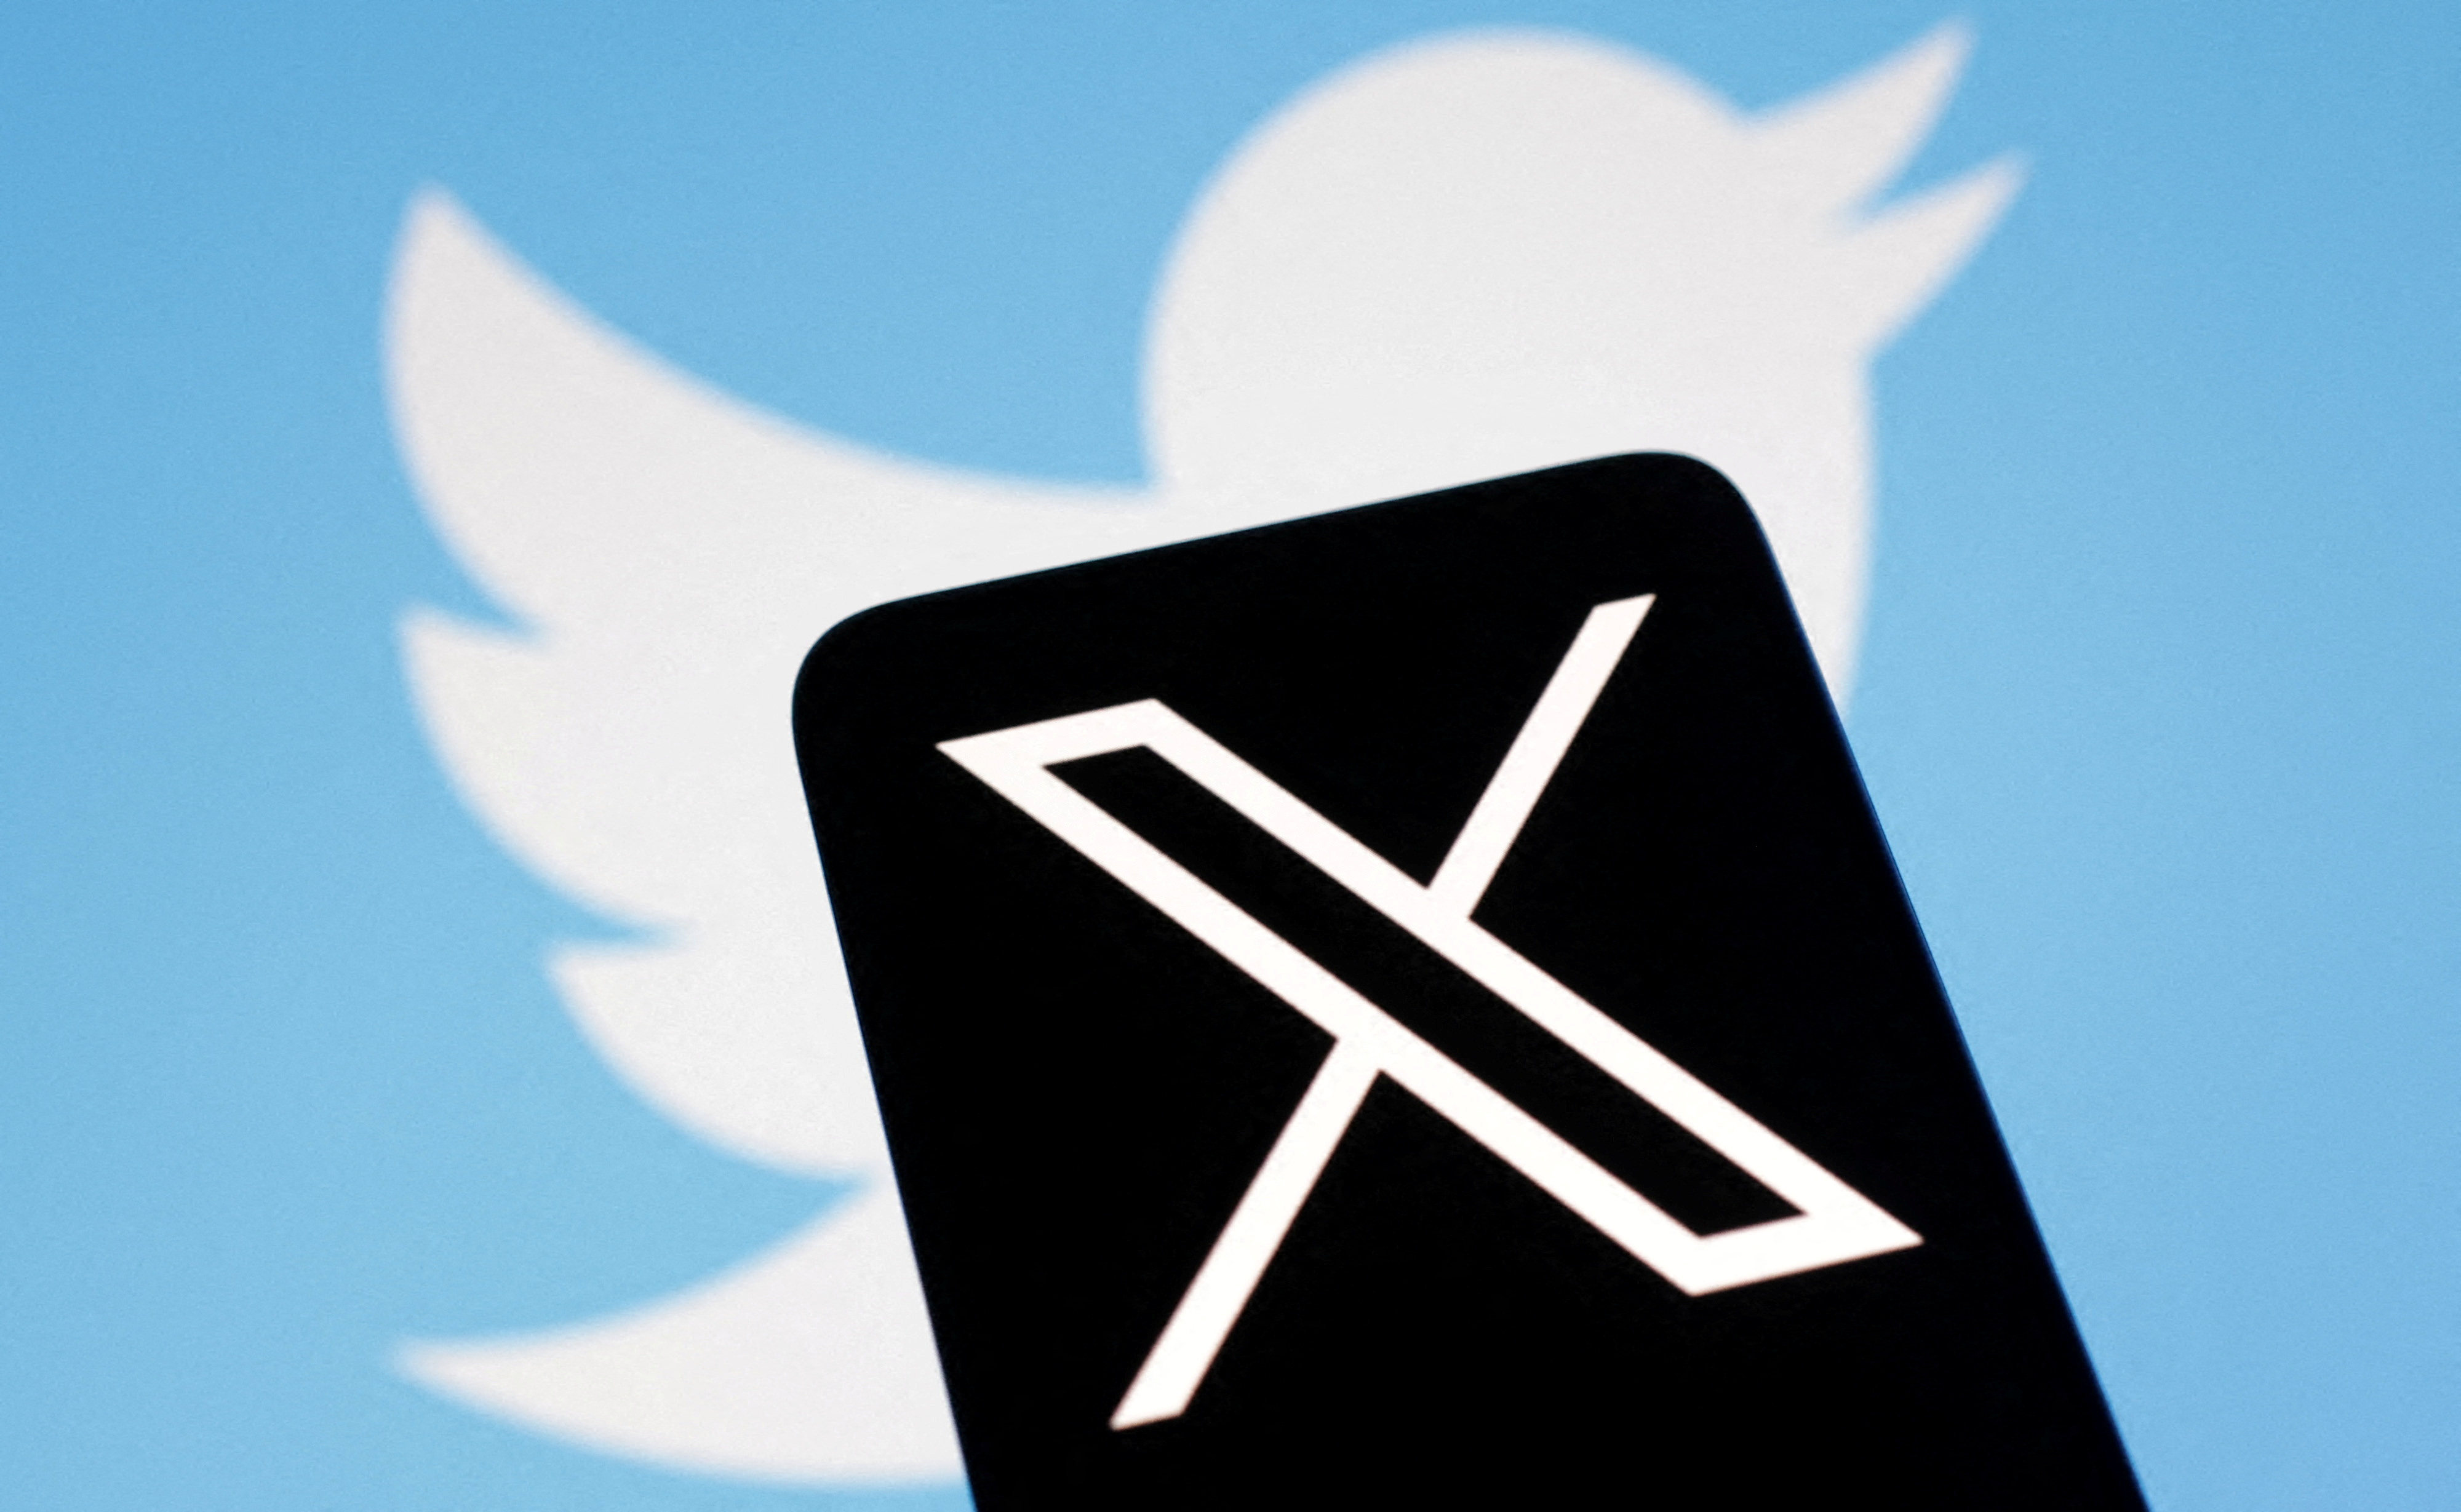 The logo for social media platform X, following the rebranding of Twitter. The rapid decline in X’s advertising revenue and an exodus of users have raised concerns Elon Musk’s decision to change the company’s name could do more harm than good to a firm already in financial difficulties. Photo: Reuters